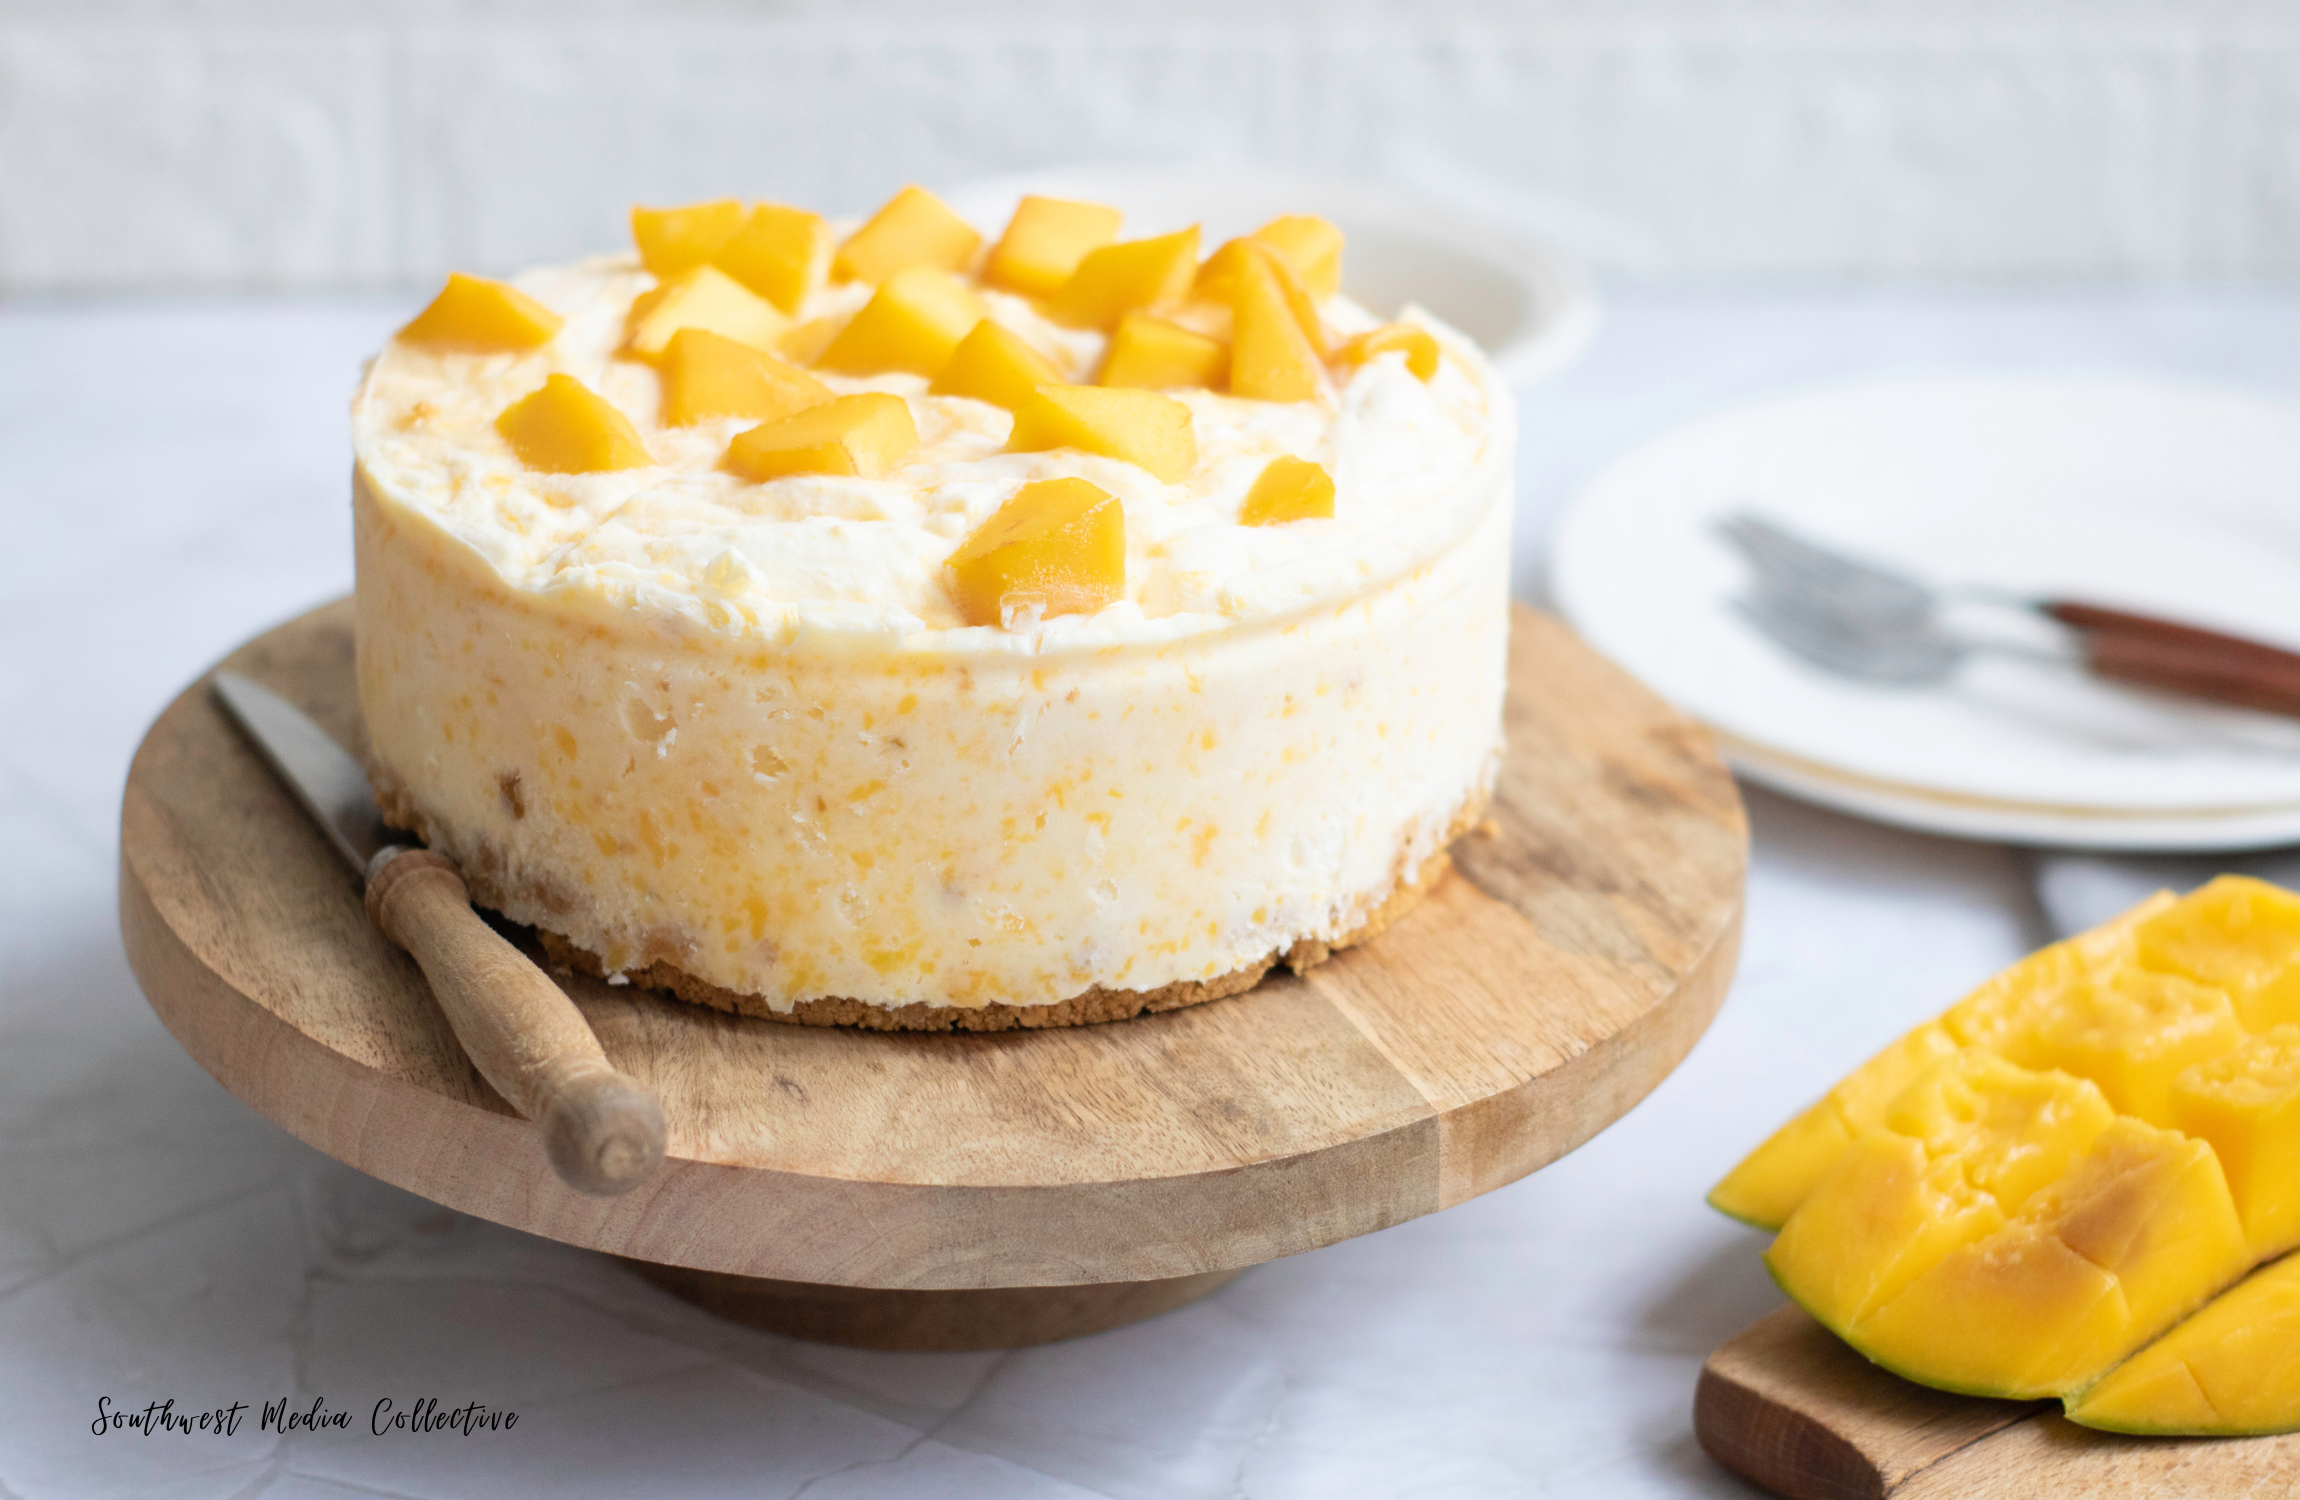 Easy and delicious Mango Cheesecake - the perfect dessert to welcome warm, summer weather!  This yummy dessert comes together quickly to create a beautiful dessert that won't fail to impress!